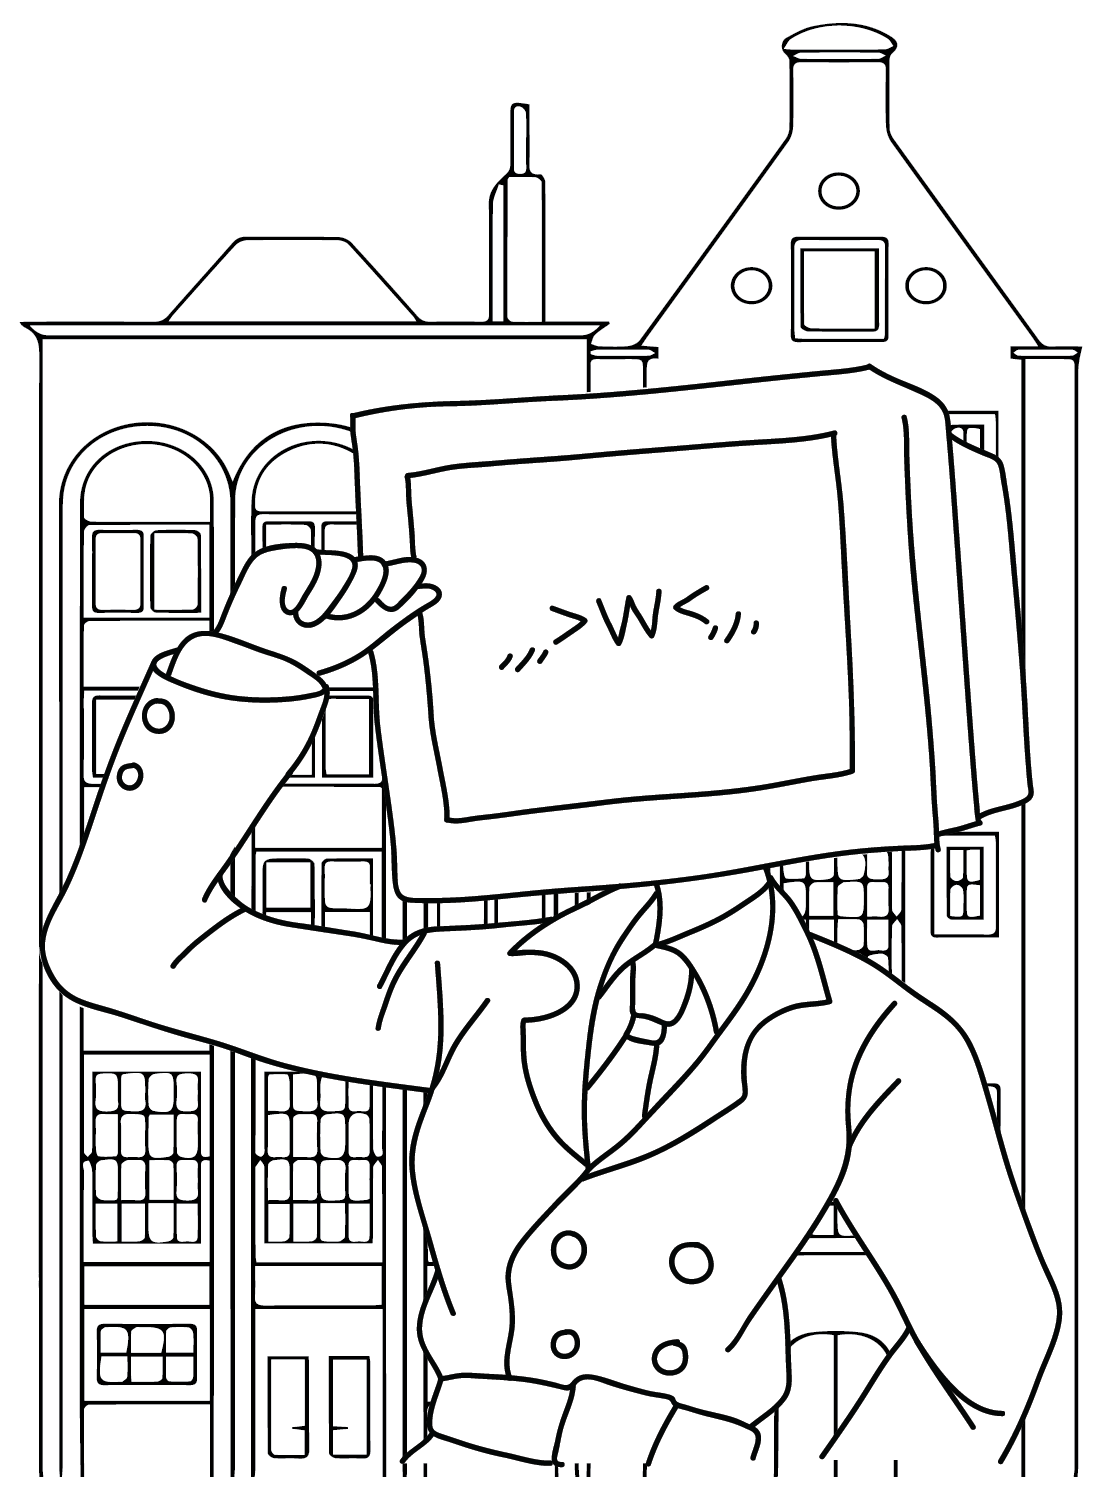 Pin on TV Man Coloring Pages